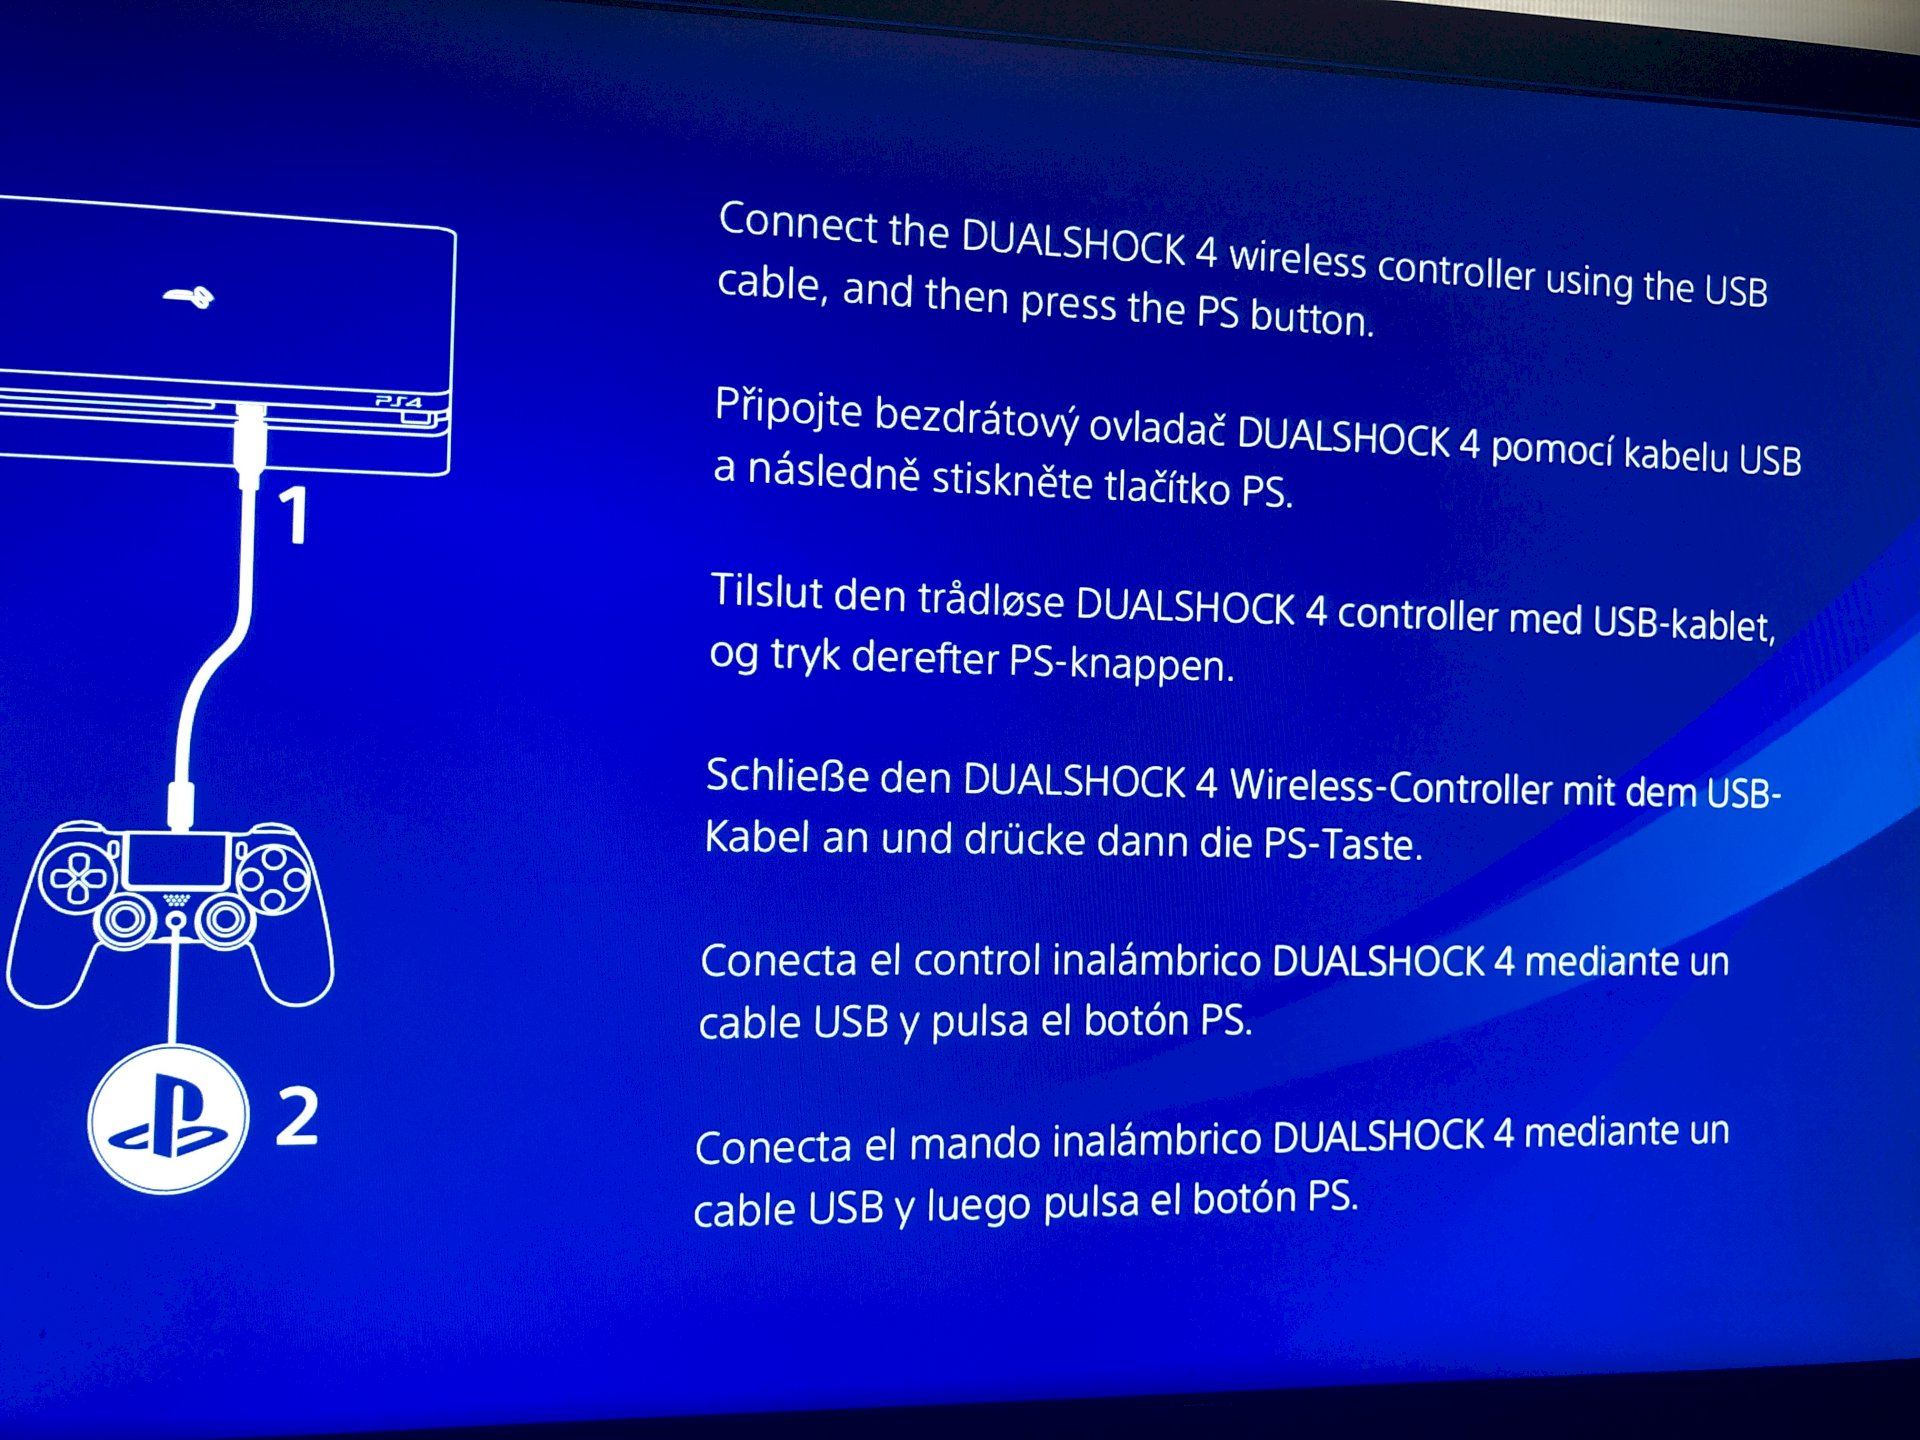 Ps4 controller does not connect mach - ConsolesHub